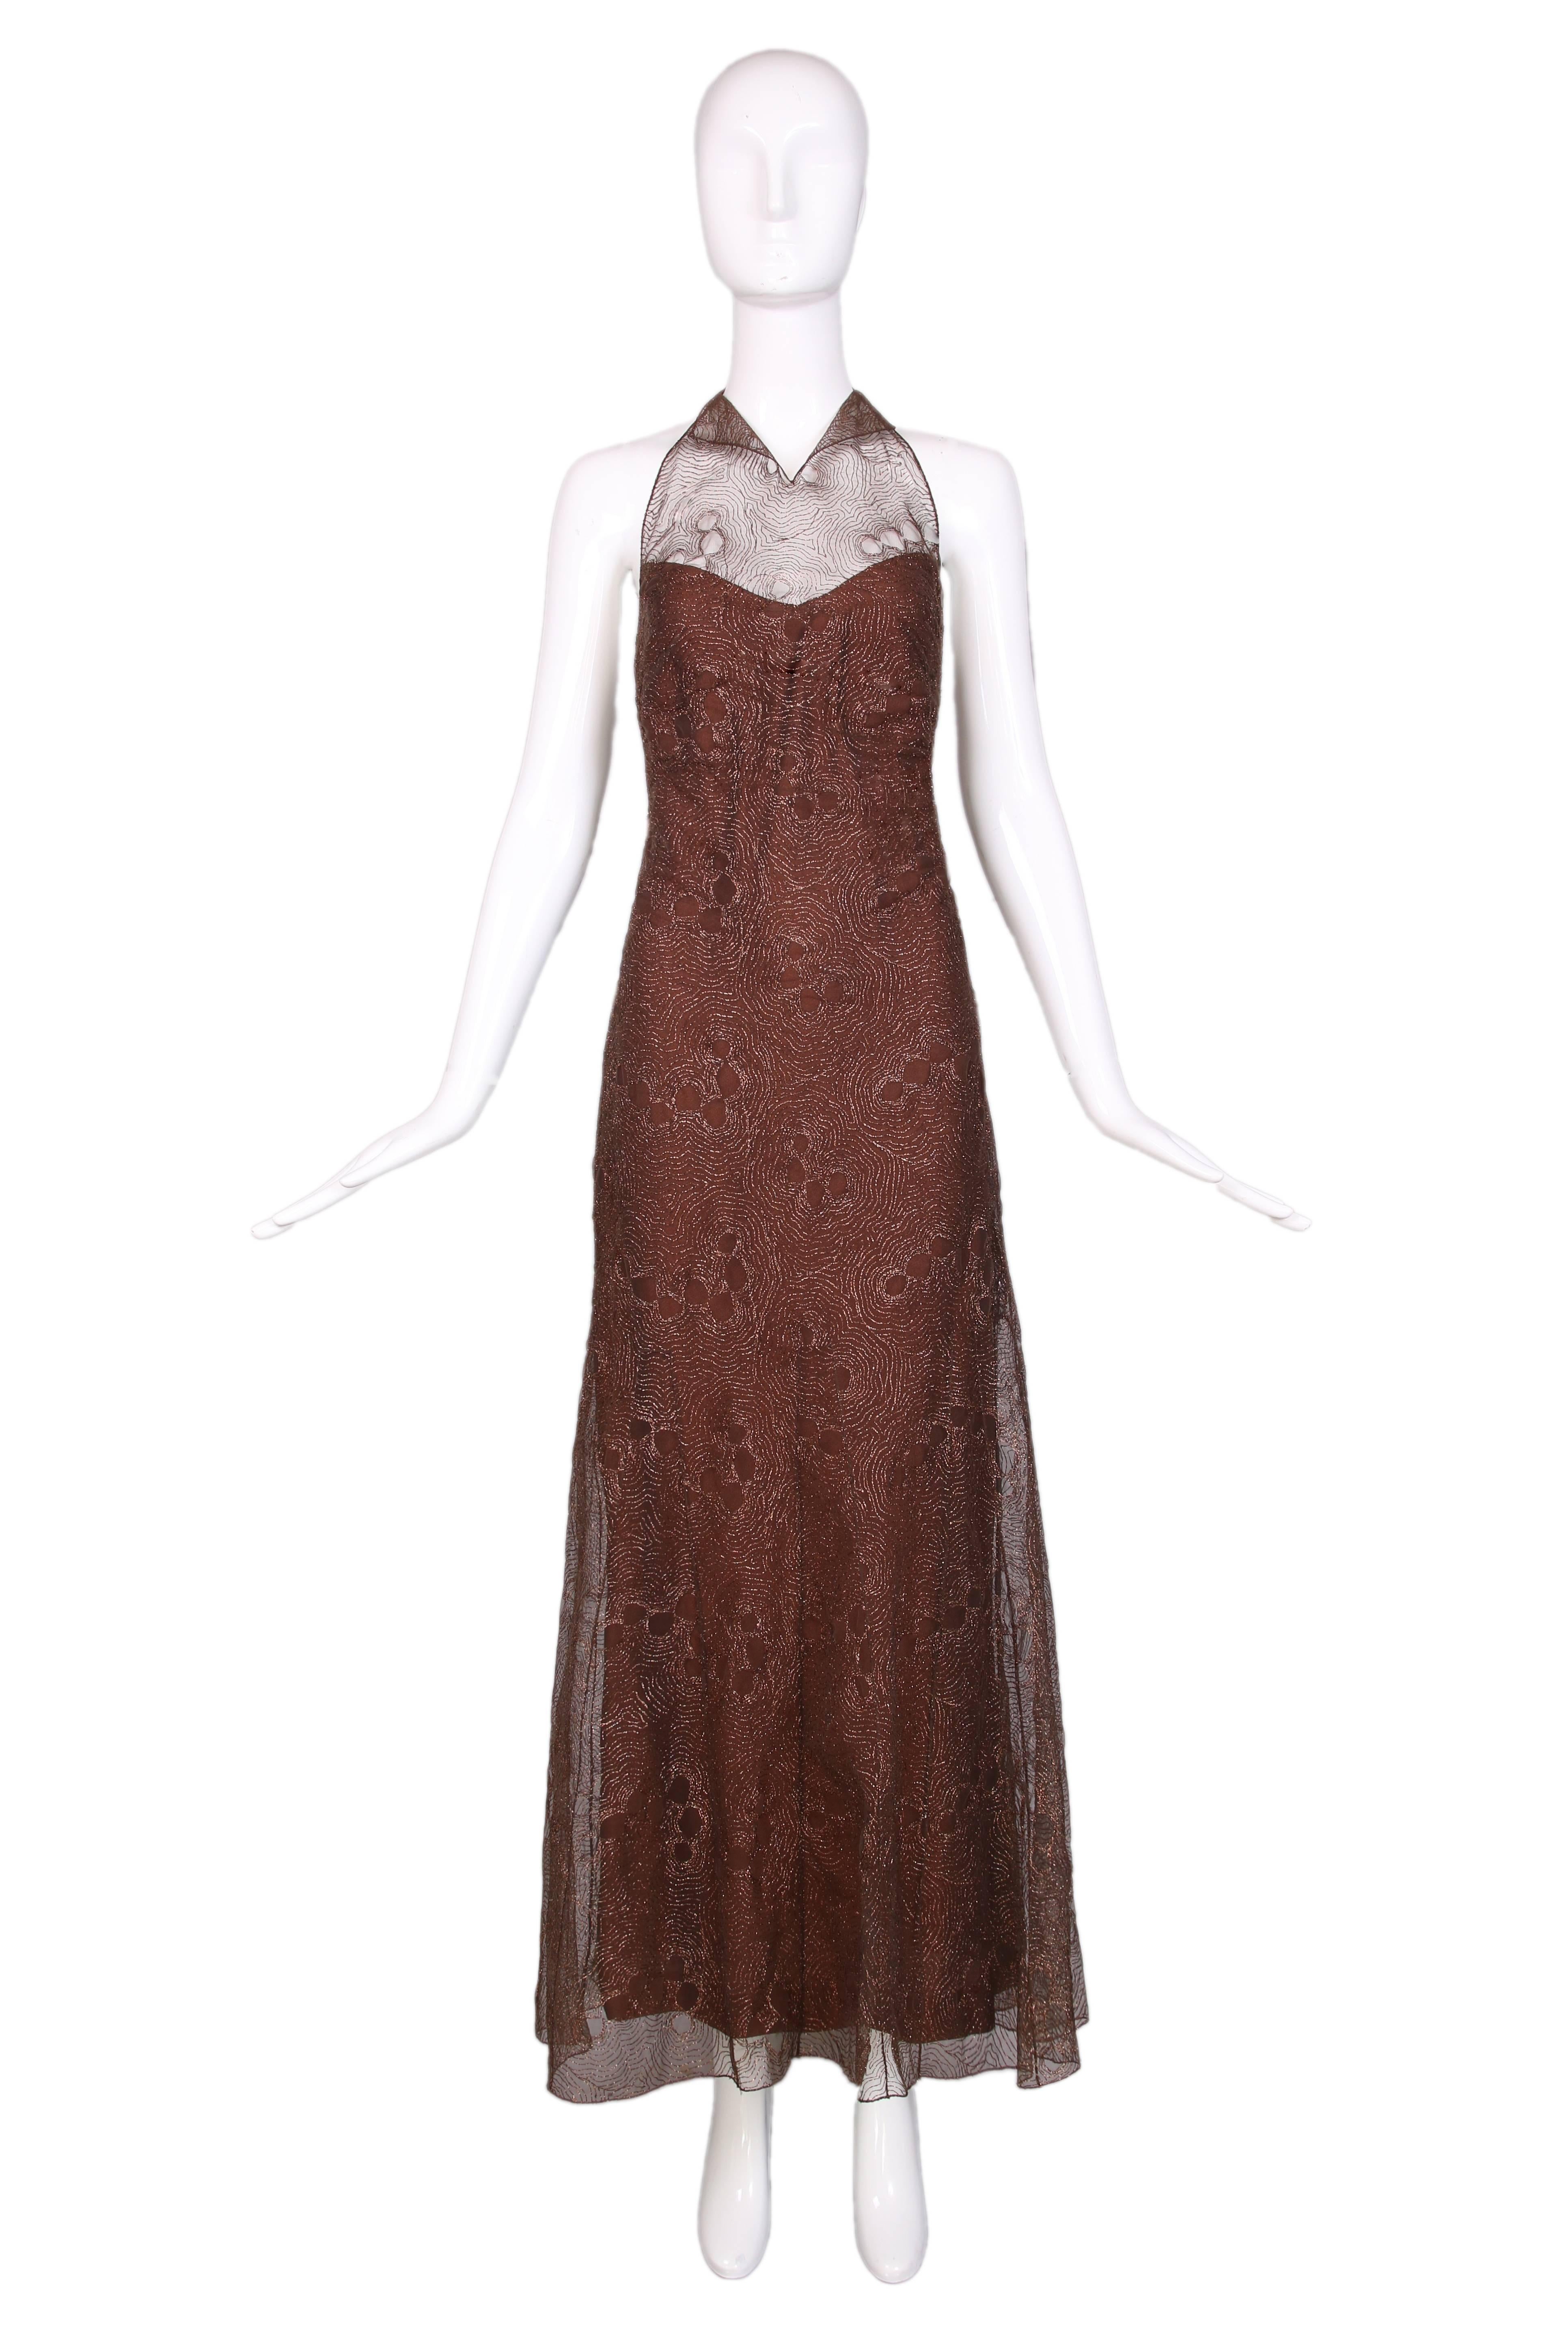 1999 Chanel bronze evening gown featuring tulle overlay embroidered with bronze metallic thread in a floral pattern. Under layer has a sweetheart neckline and low back with zipper closure featuring decorative small, bronze Chanel logo buttons. In